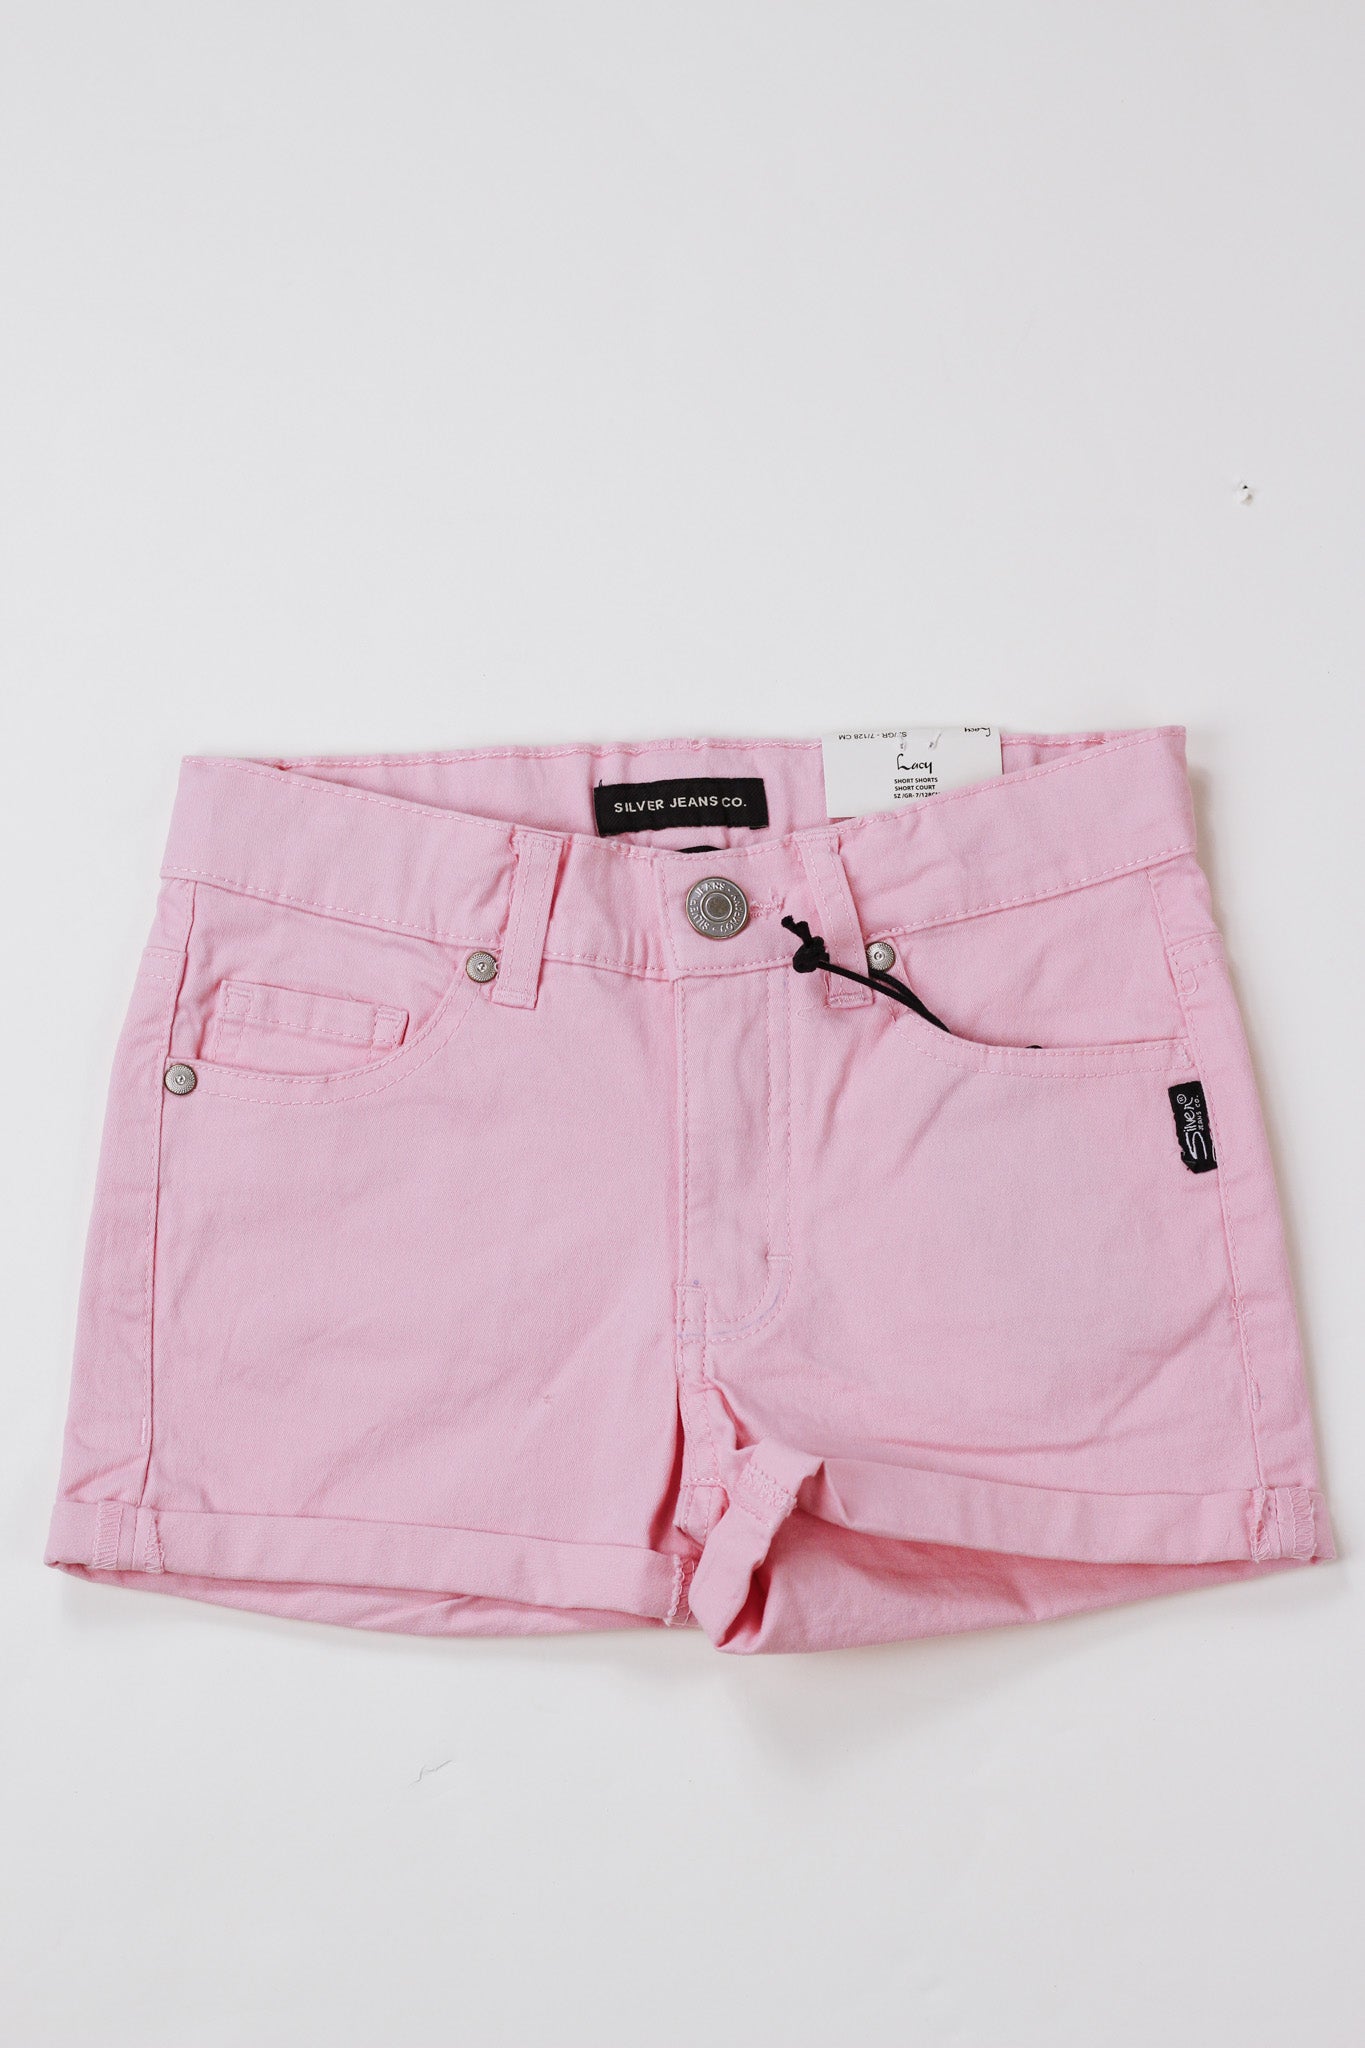 Girls Pink Shorts By Silver Jean Co